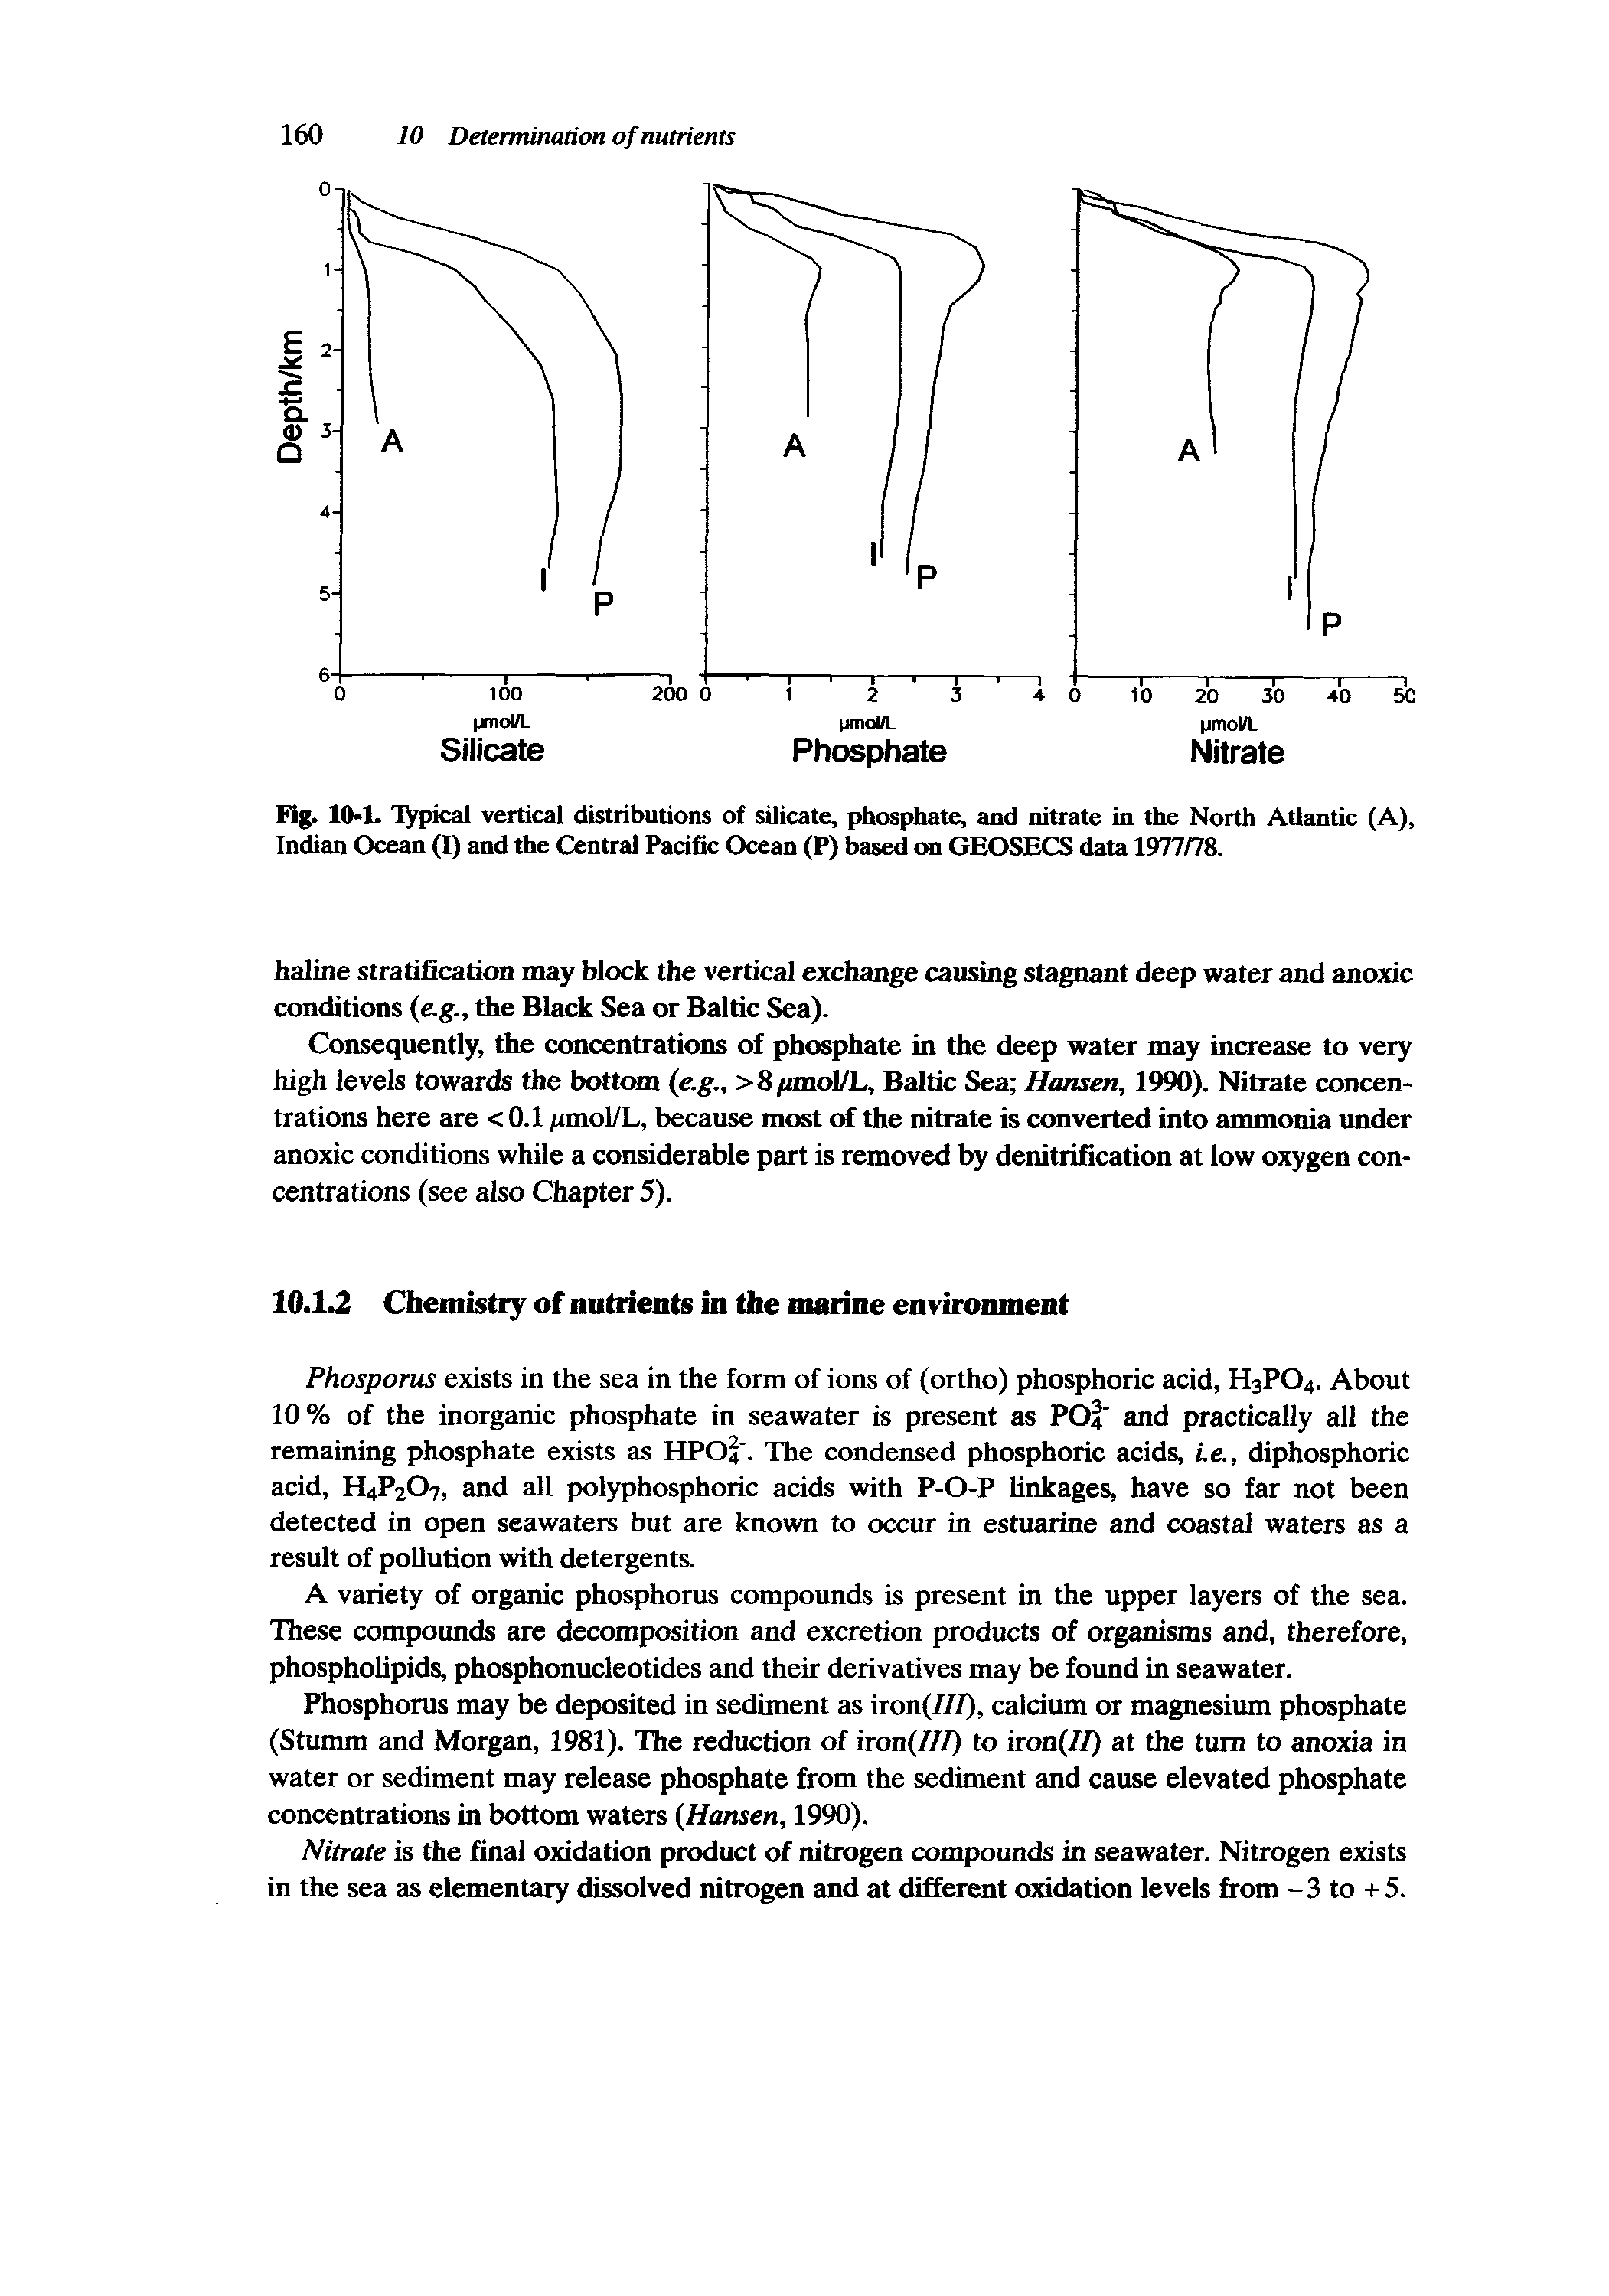 Fig. 10-1. Typical vertical distributions of silicate, phosphate, and nitrate in the North Atlantic (A), Indian Ocean (I) and the Central Pacific Ocean (P) based cm GEOSECS data 1977A78.